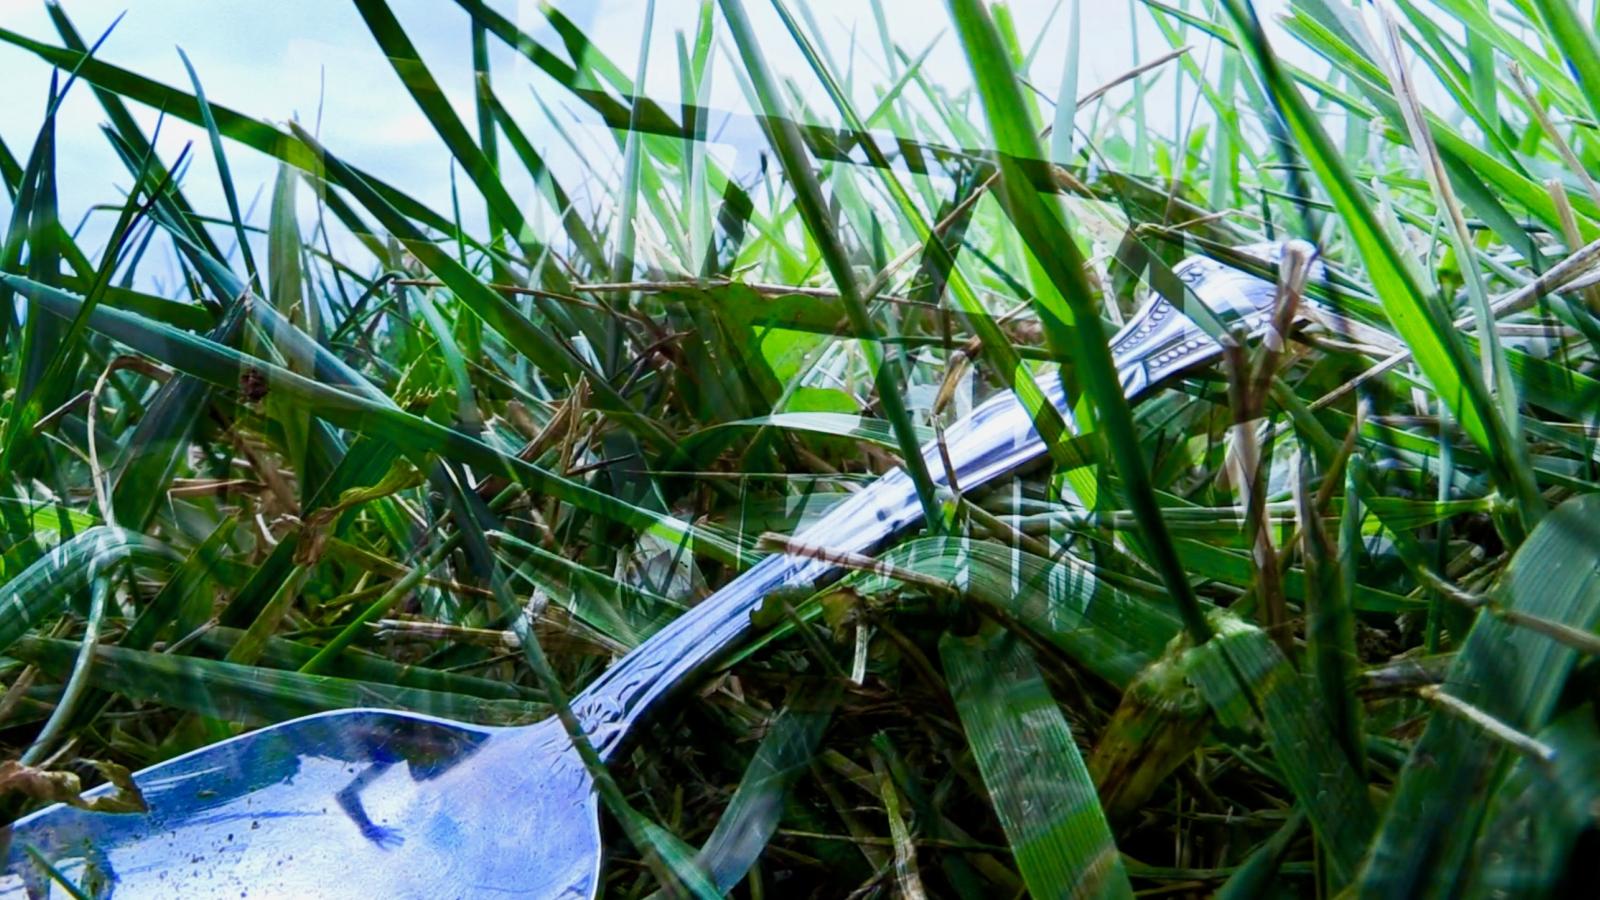 Serving spoon in grass